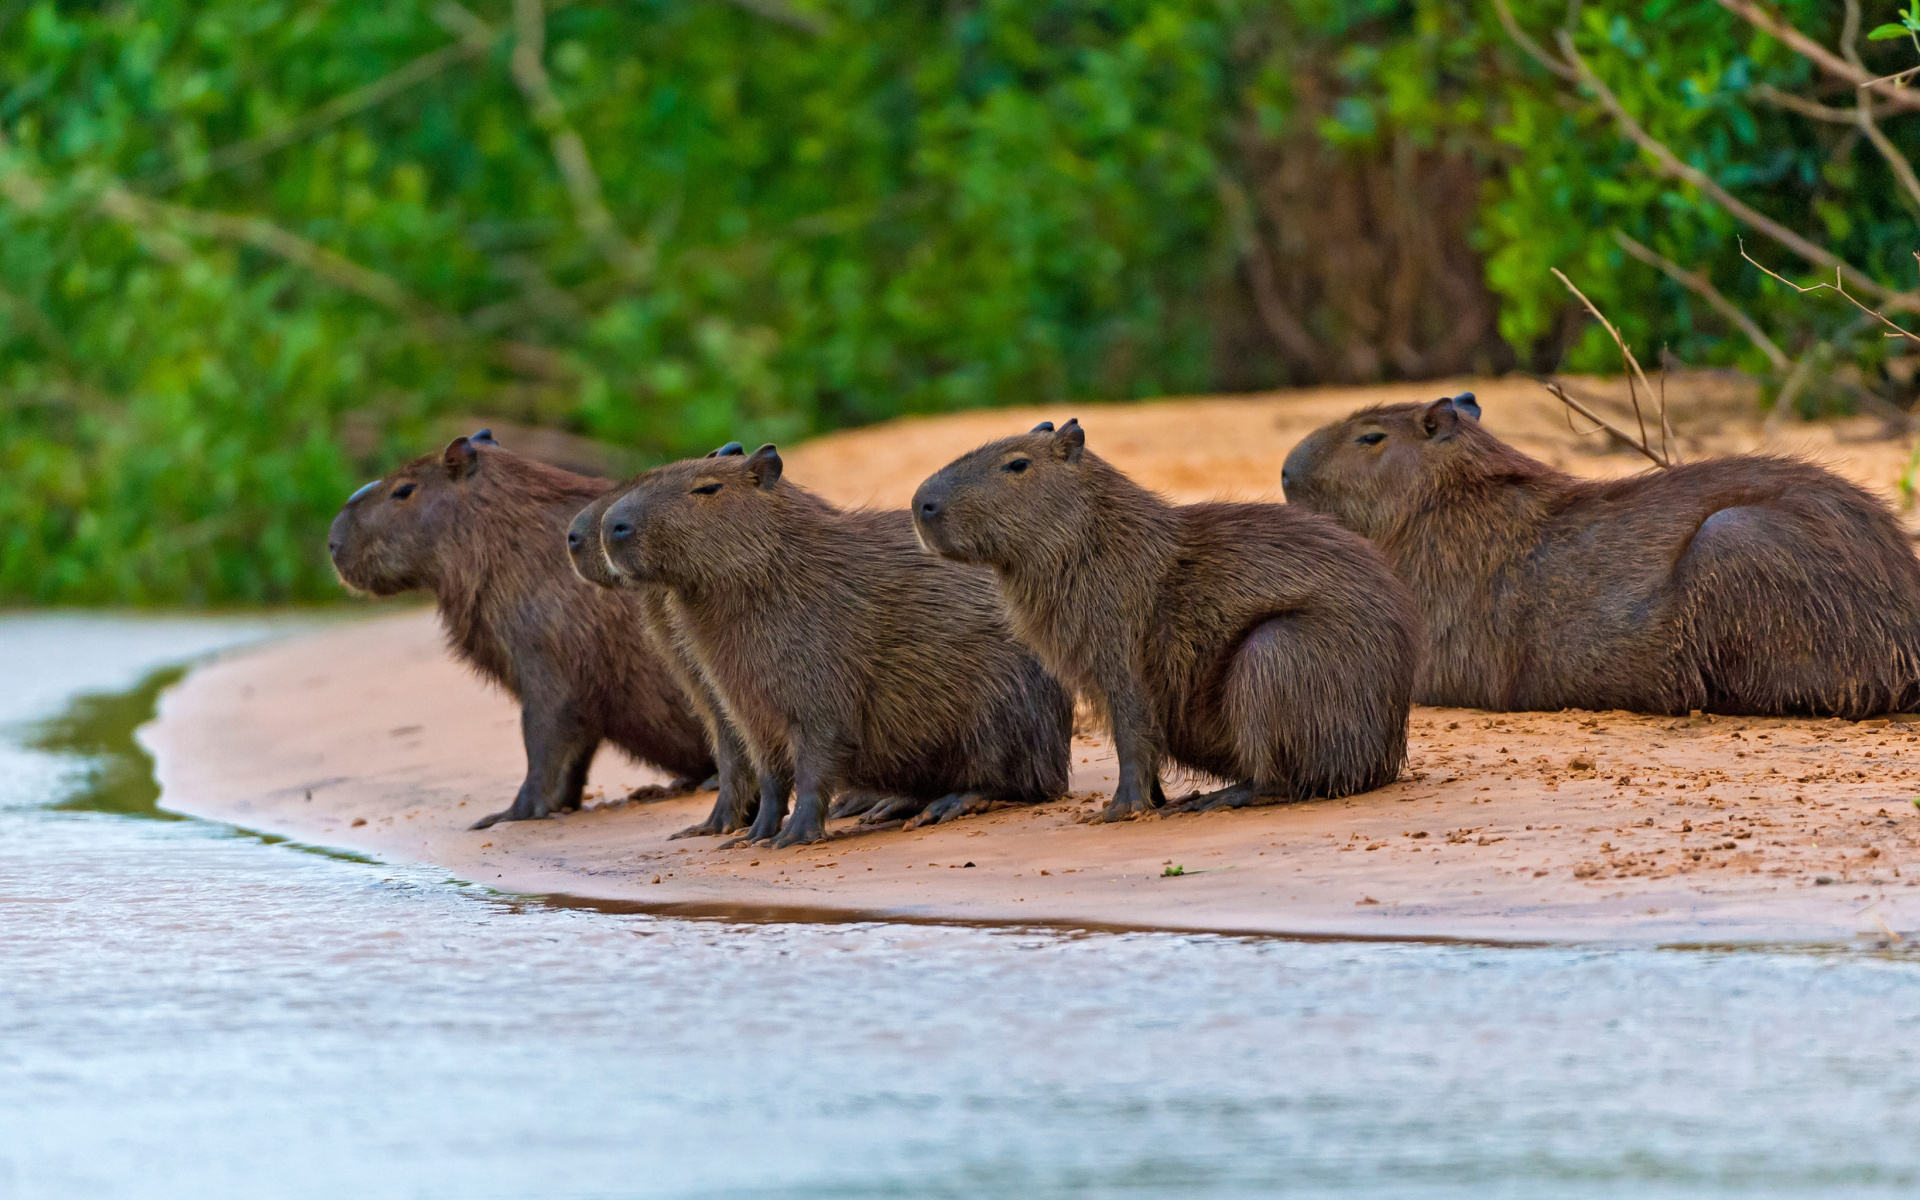 capybaras 1080P 2k 4k Full HD Wallpapers Backgrounds Free Download   Wallpaper Crafter